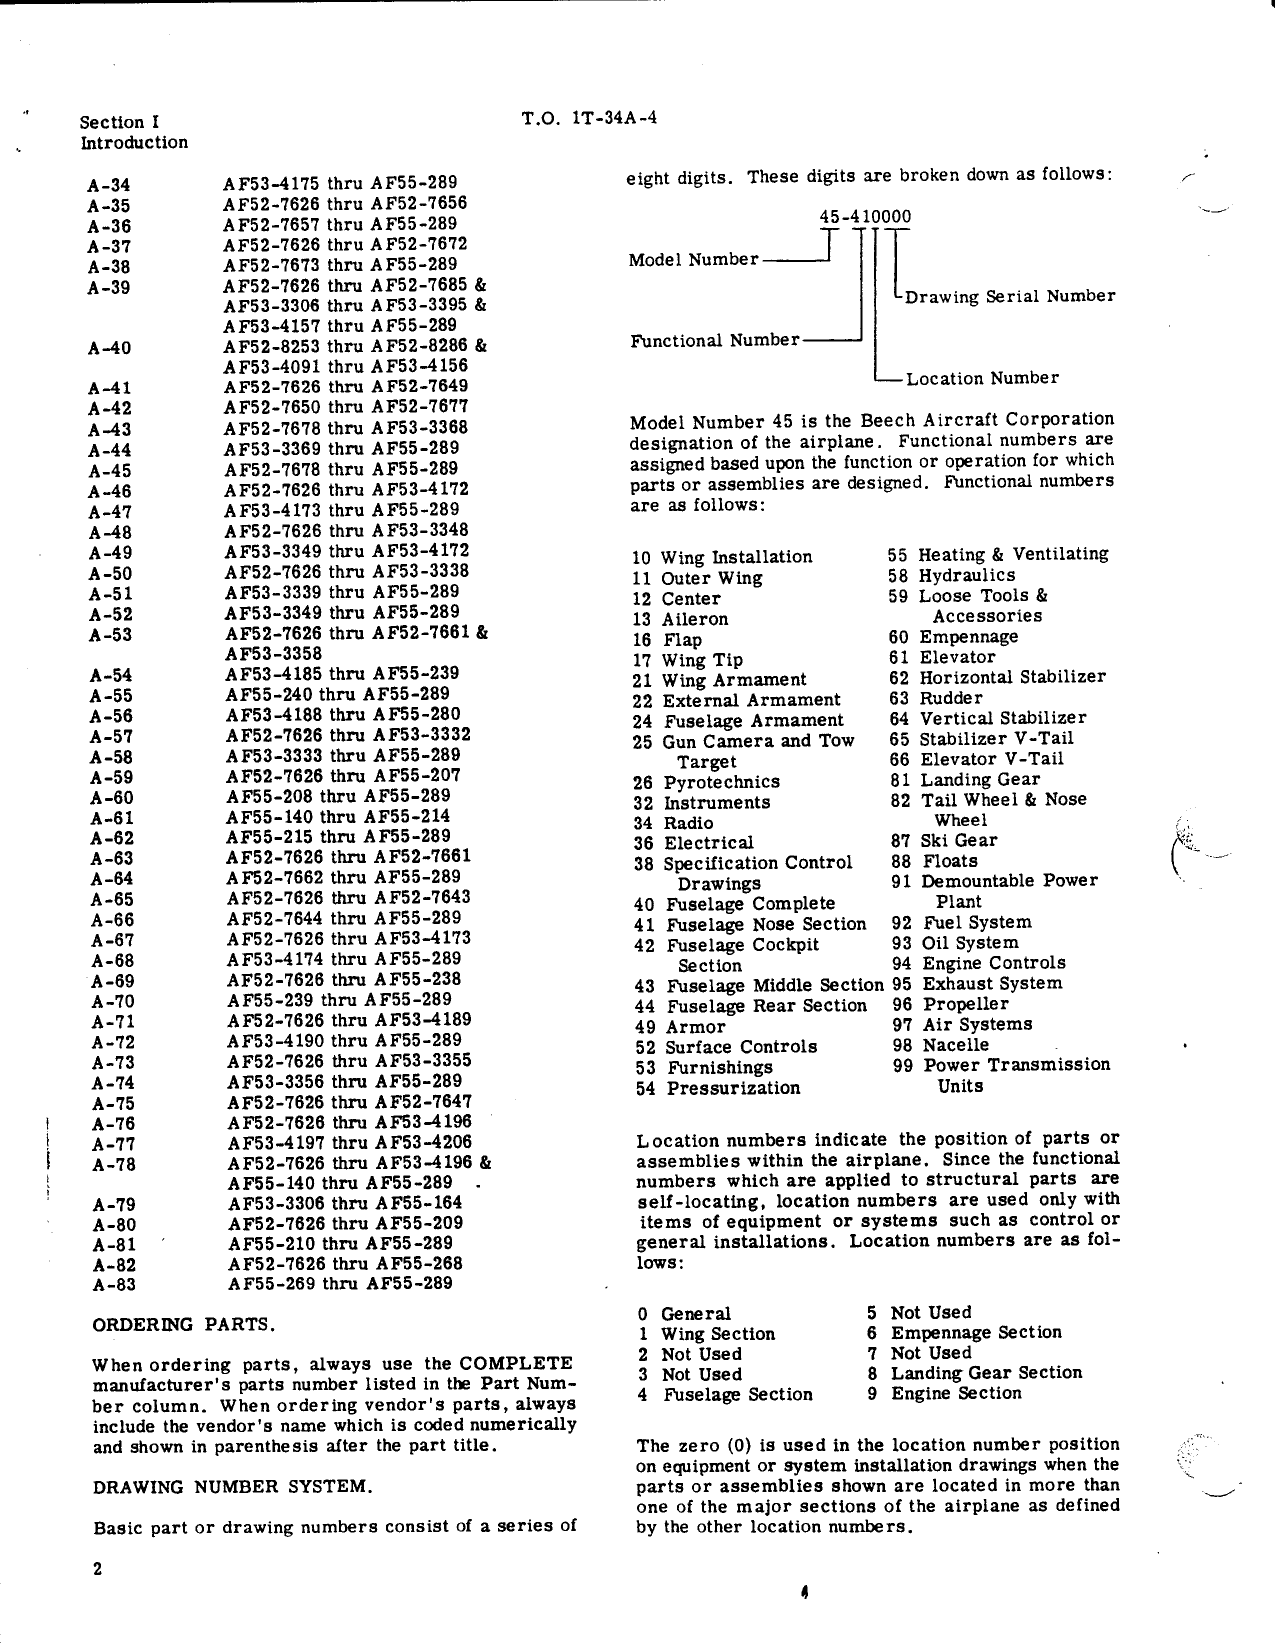 Sample page 6 from AirCorps Library document: Illustrated Parts Breakdown for USAF Series T-34A Aircraft